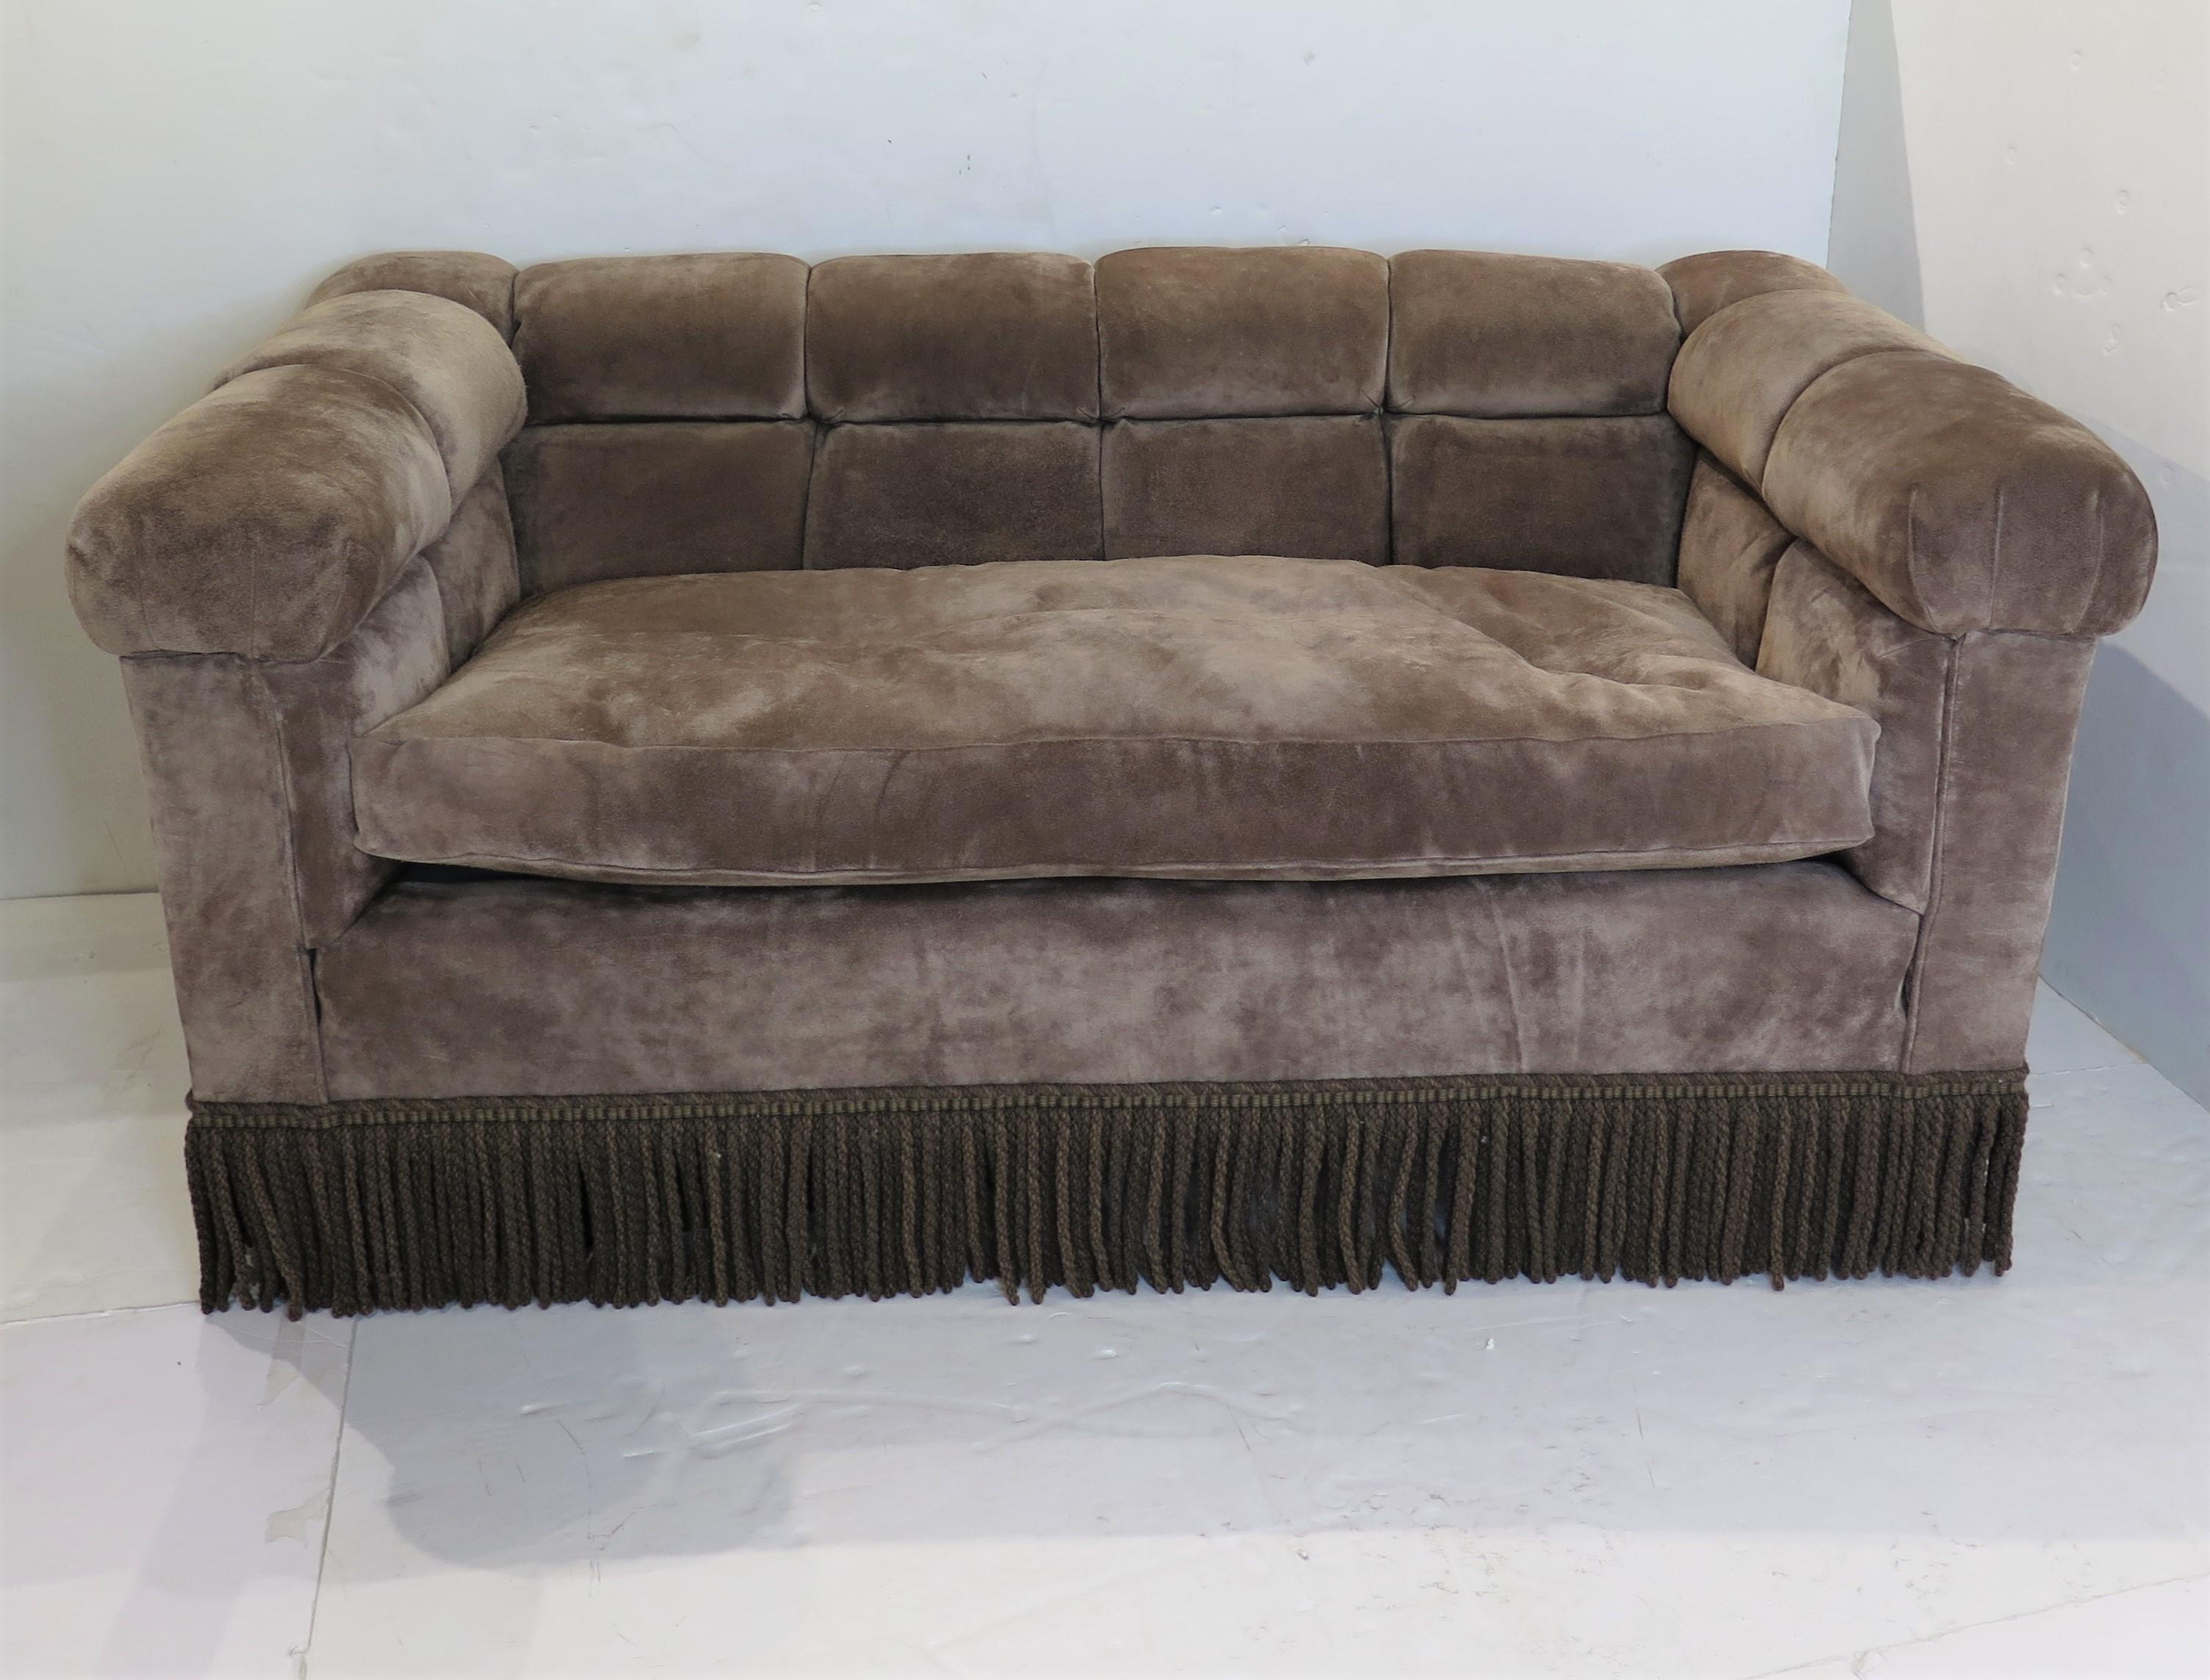 Pair of Mid-Century Suede Chesterfield Sofas by Dunbar 2